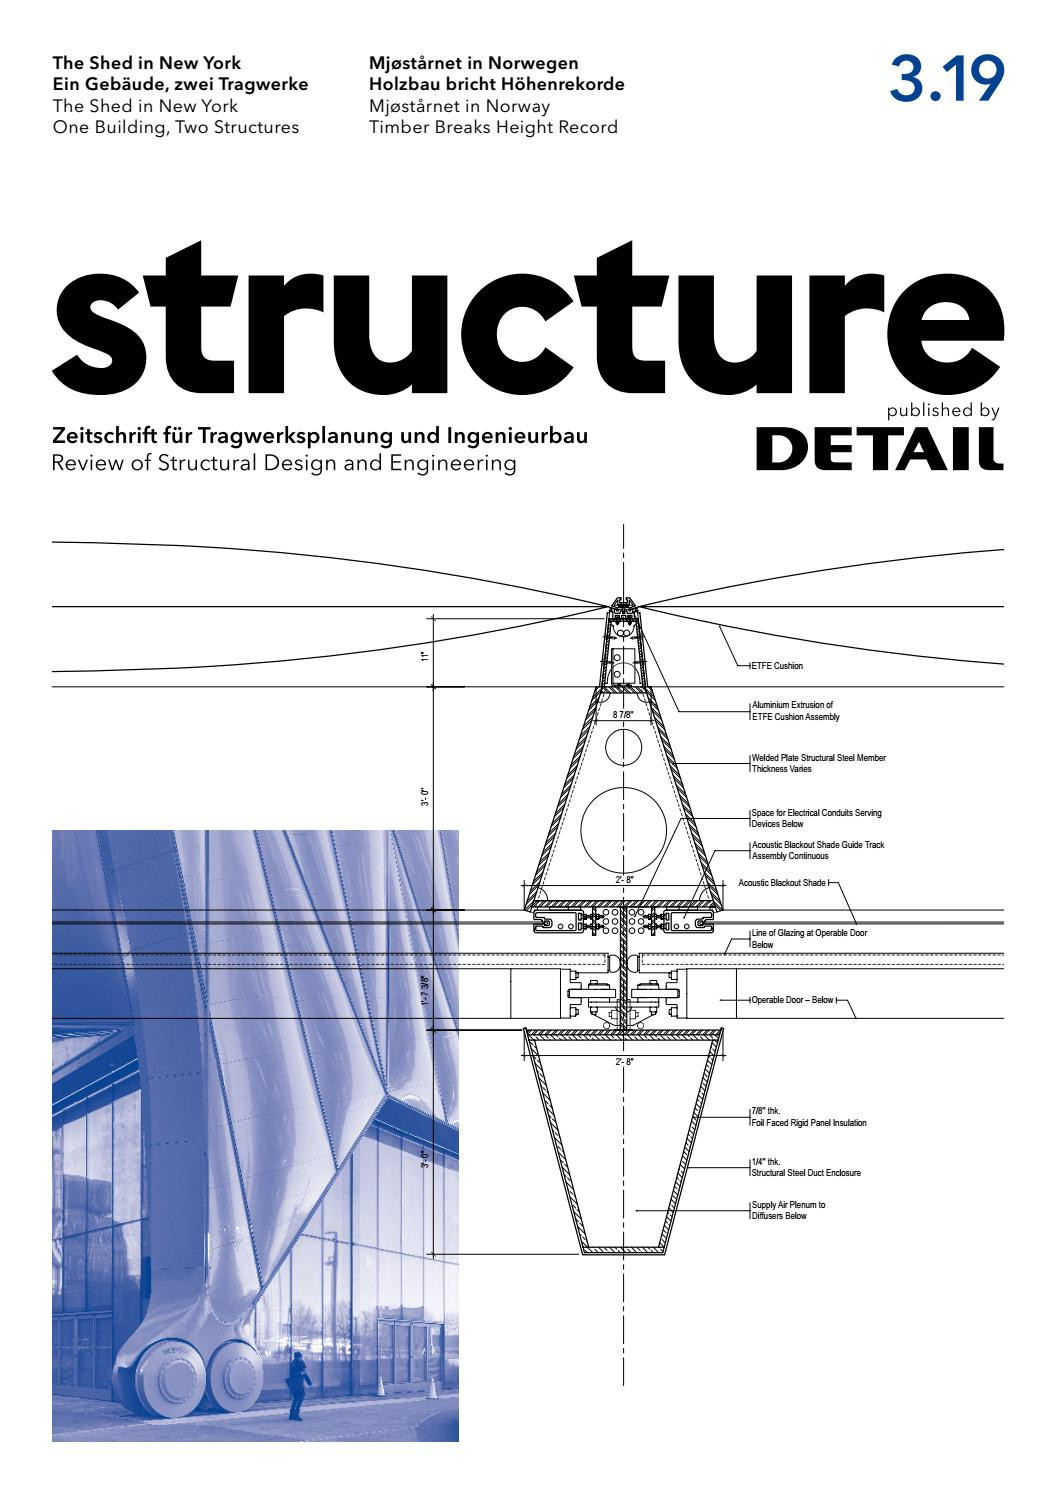 Outside Sales Aluminum Extrusions Resume Sample Structure â Published by Detail 03/2019 by Detail – issuu